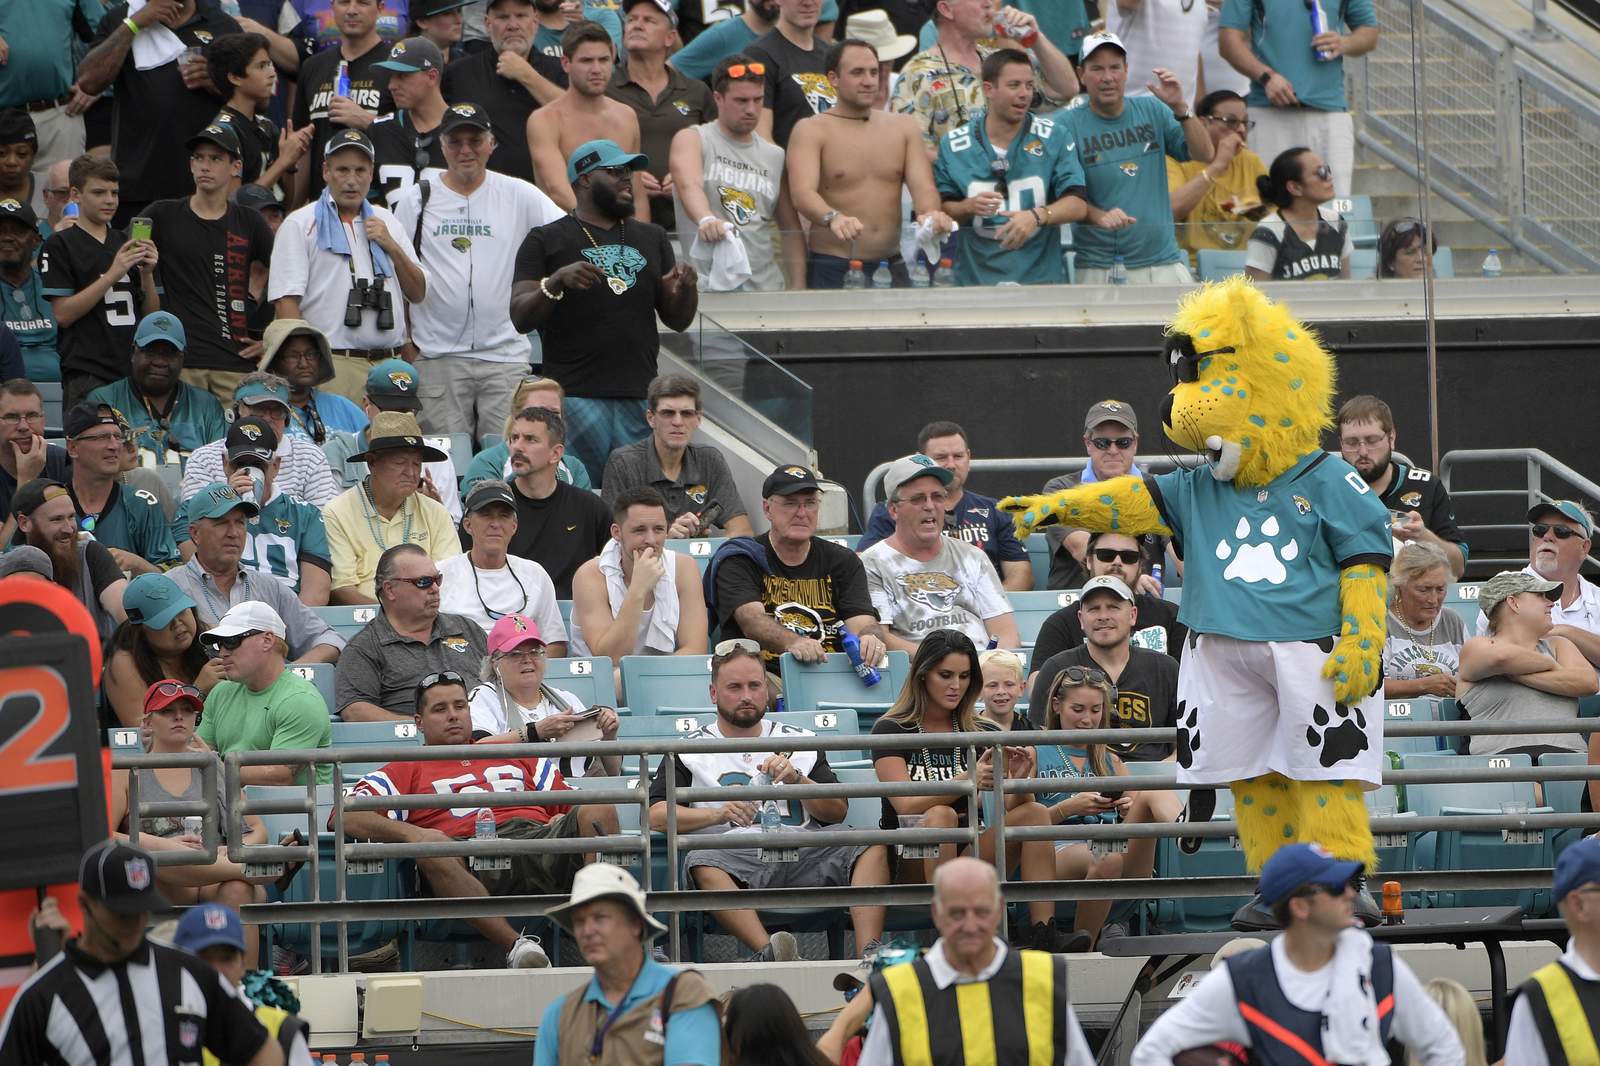 Jaguars expect to return to 100% capacity for start of NFL season